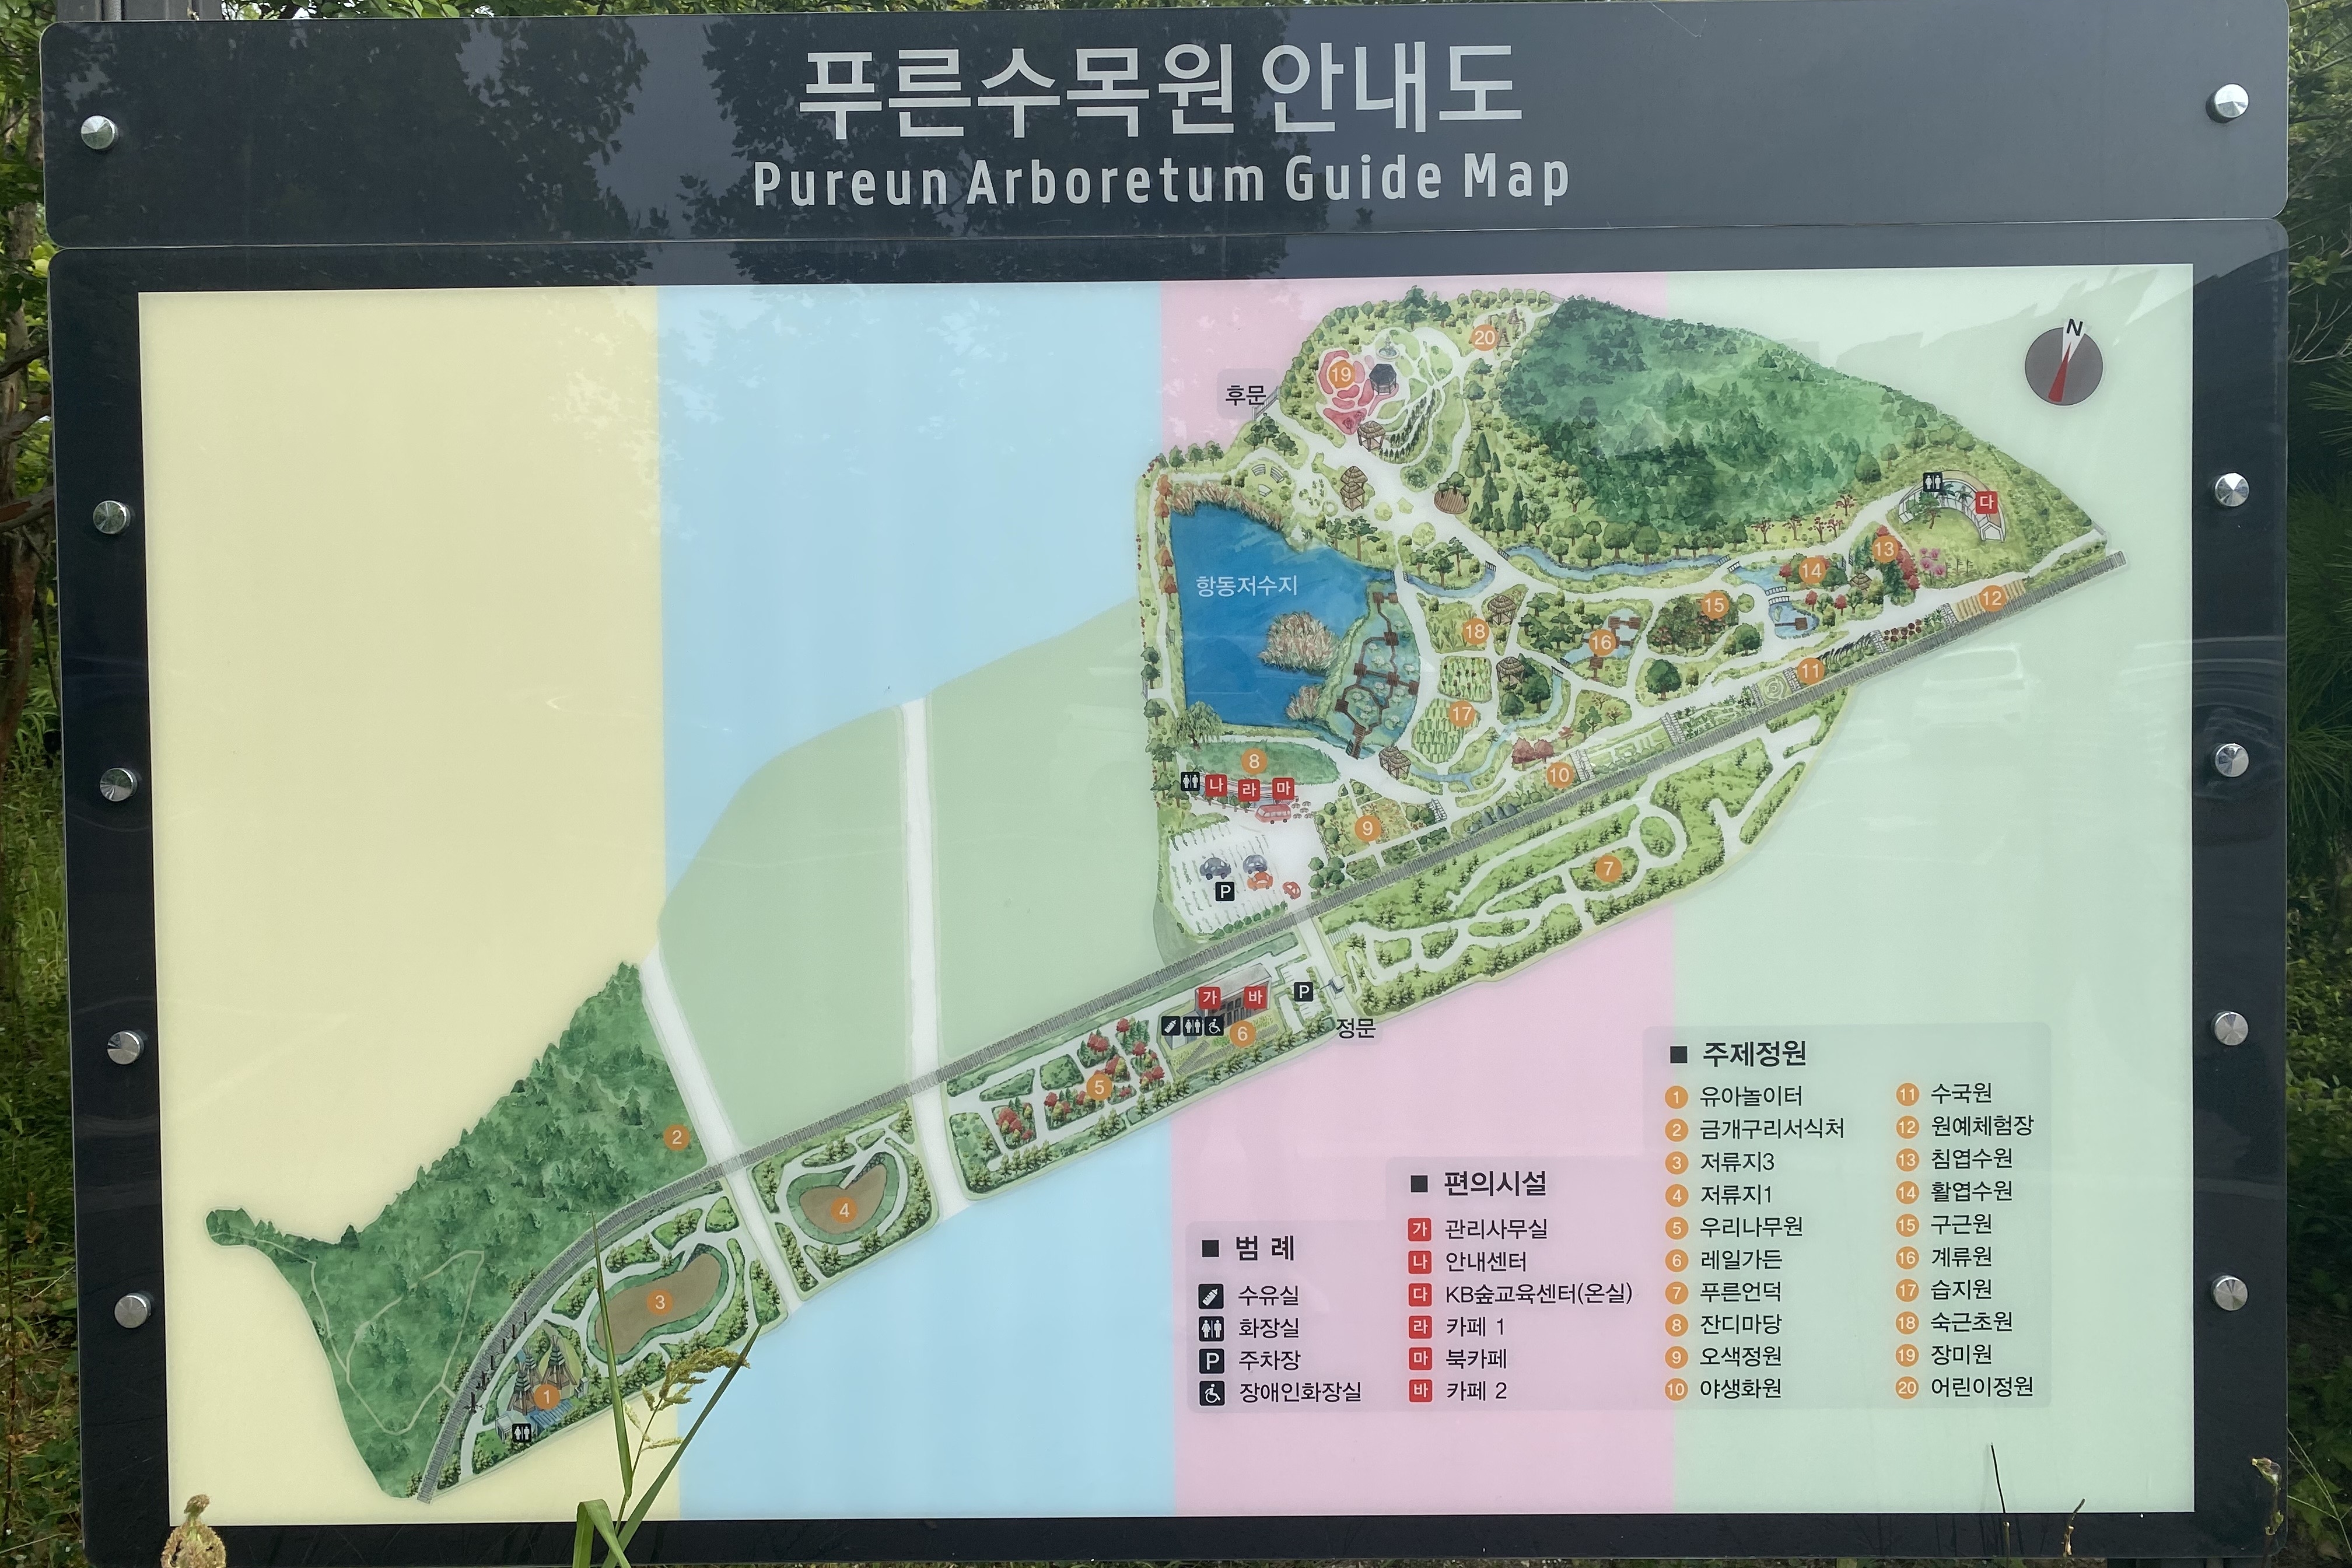 Guide map and information desk0 : Guide map of Pureun Arboretum
